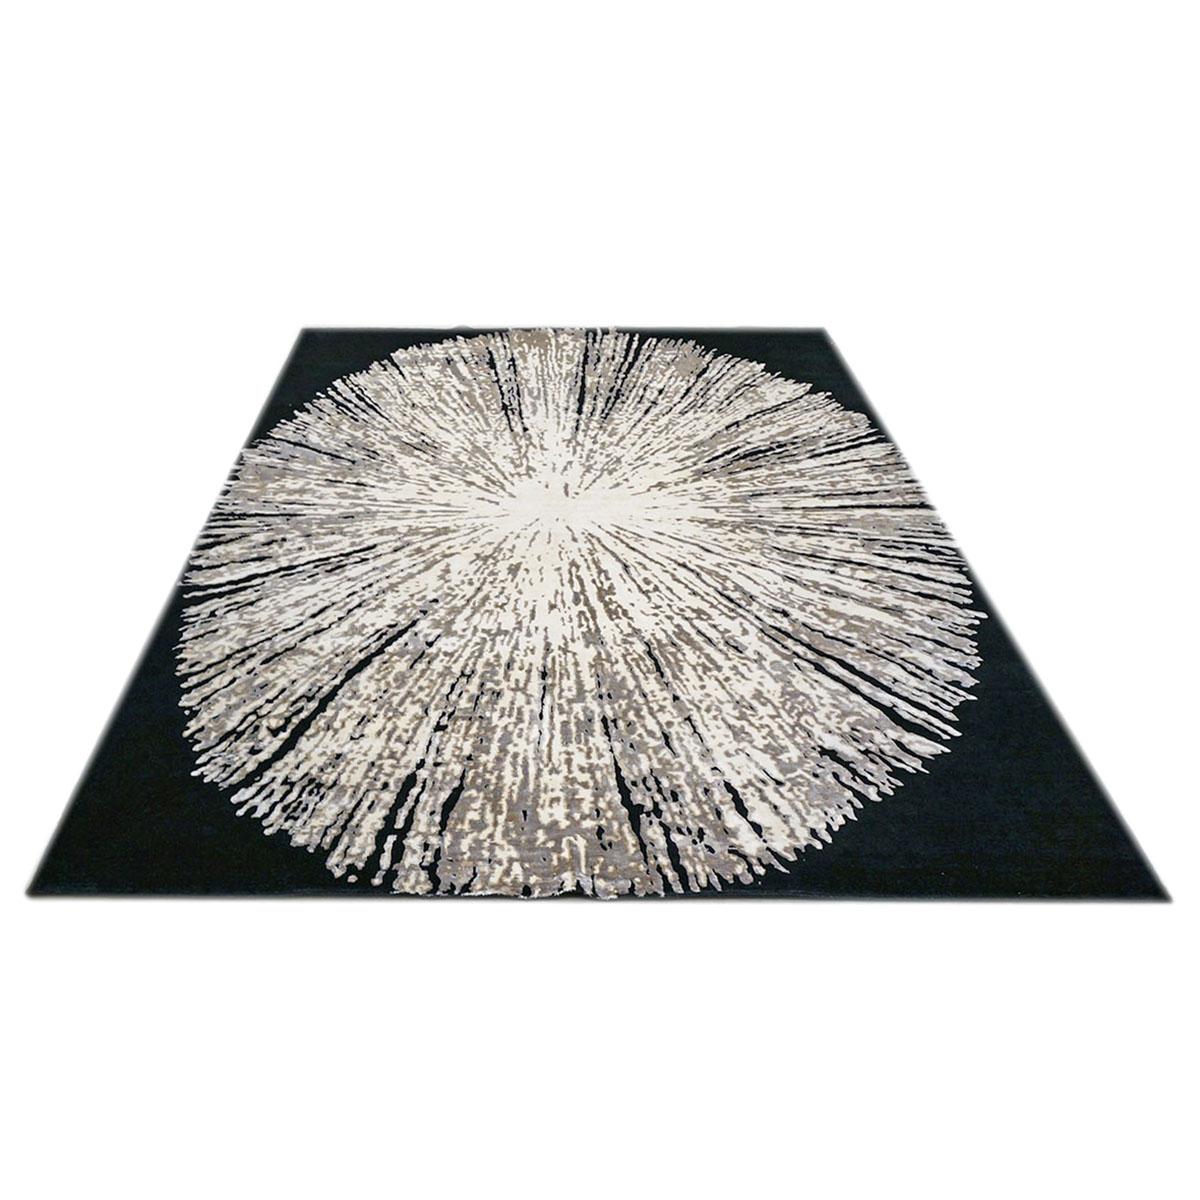 Ashly Fine Rugs presents a New Modern inspired wool & silk 9x12 black, white, & grey handmade area rug with lustrous shiny fibers and a thick durable pile. This gorgeous collection has been designed by our in-house designer and was 100% handmade by